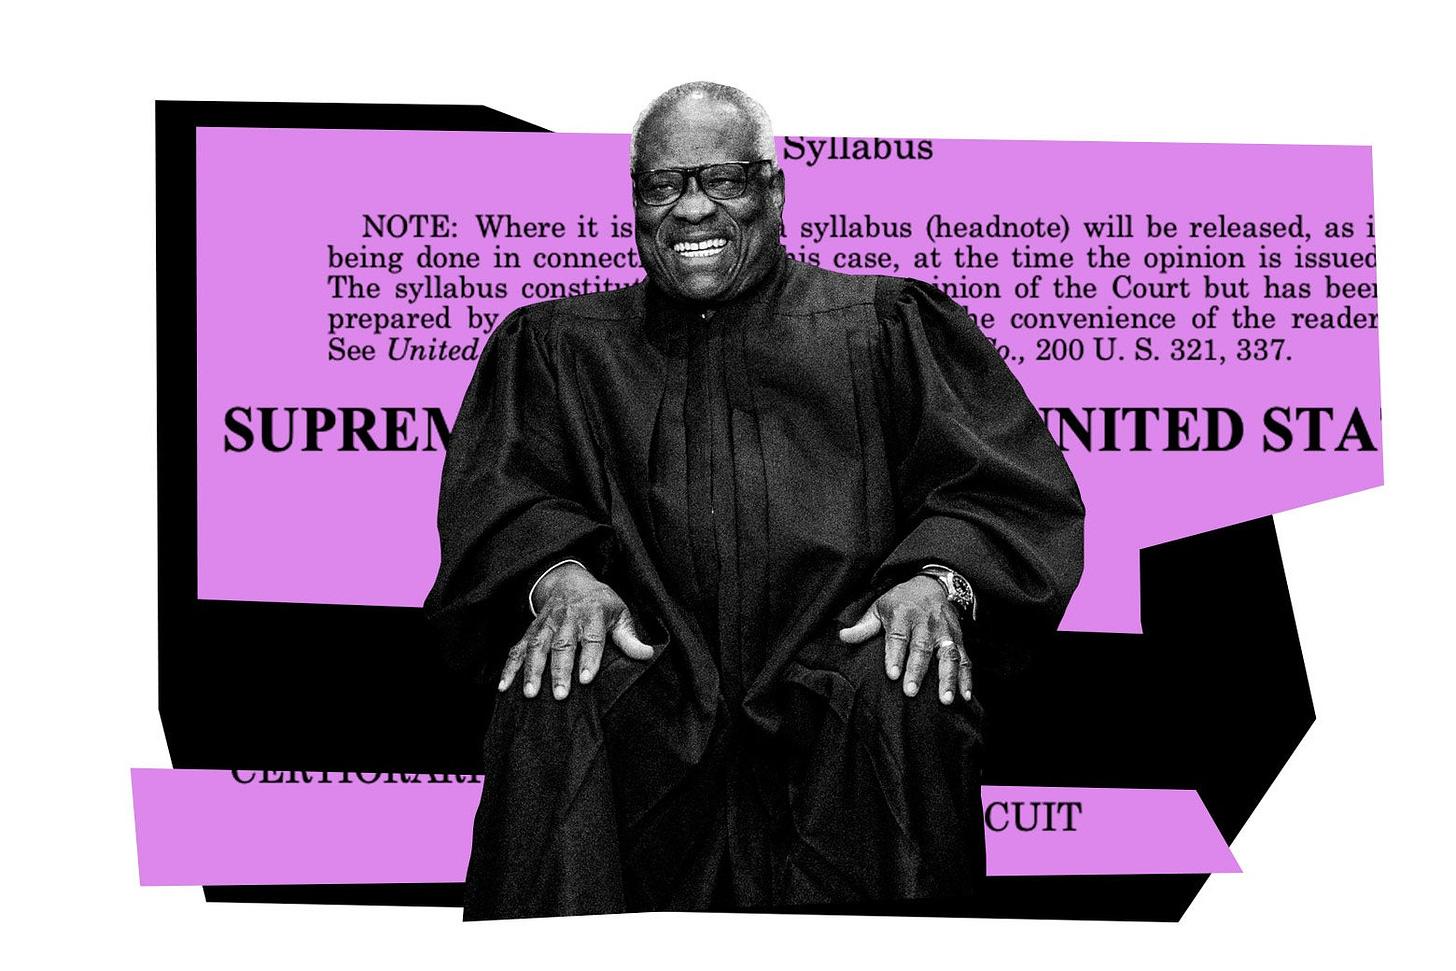 A photo illustration of Clarence Thomas against a bright purple and black collage incorporating some court documents.